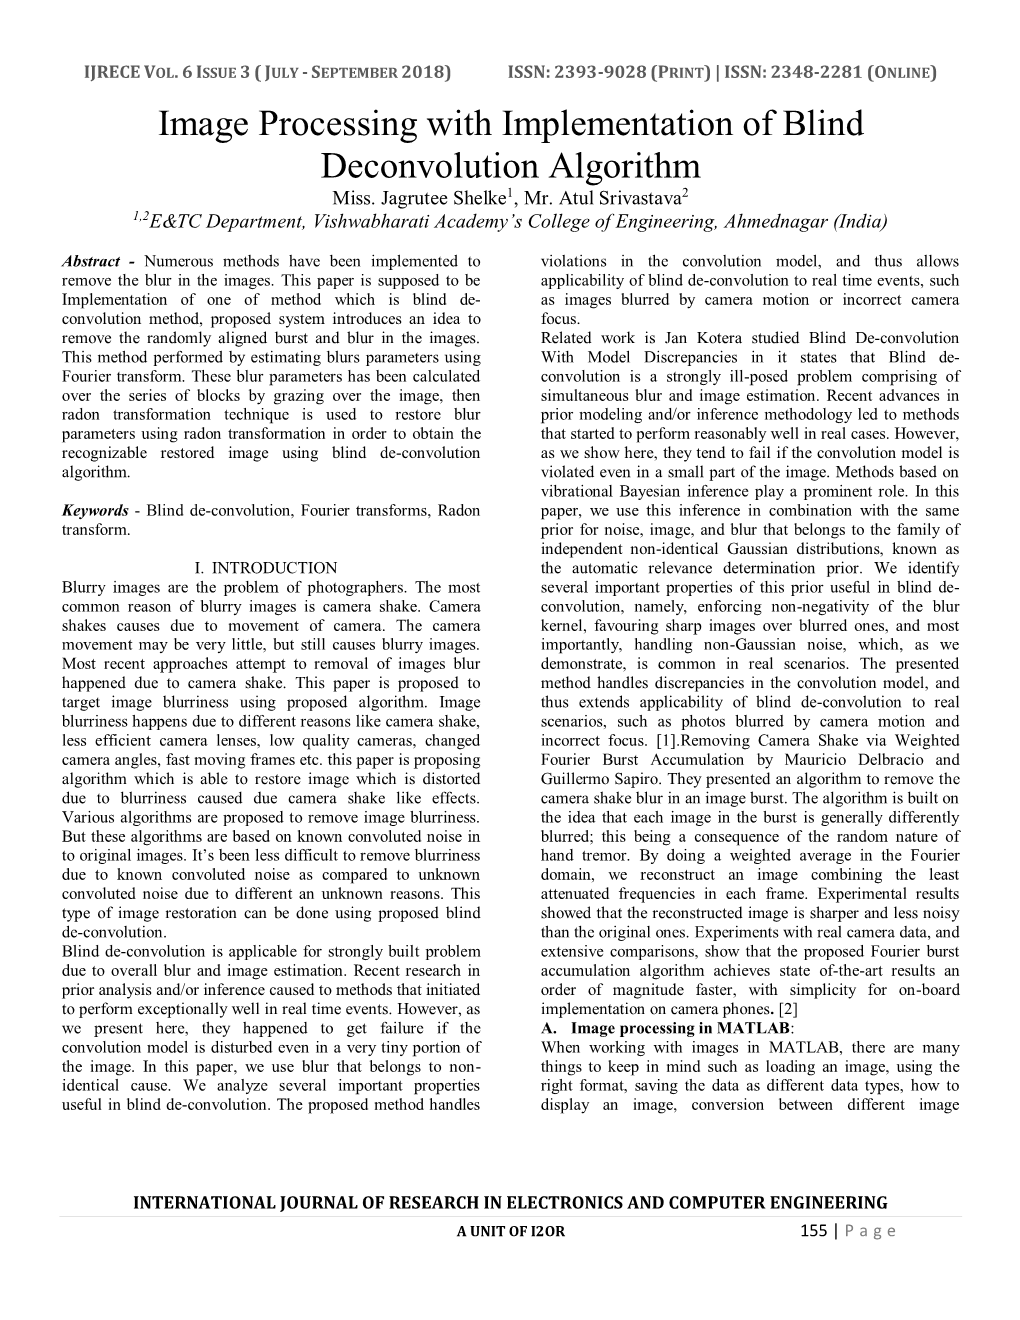 Image Processing with Implementation of Blind Deconvolution Algorithm Miss